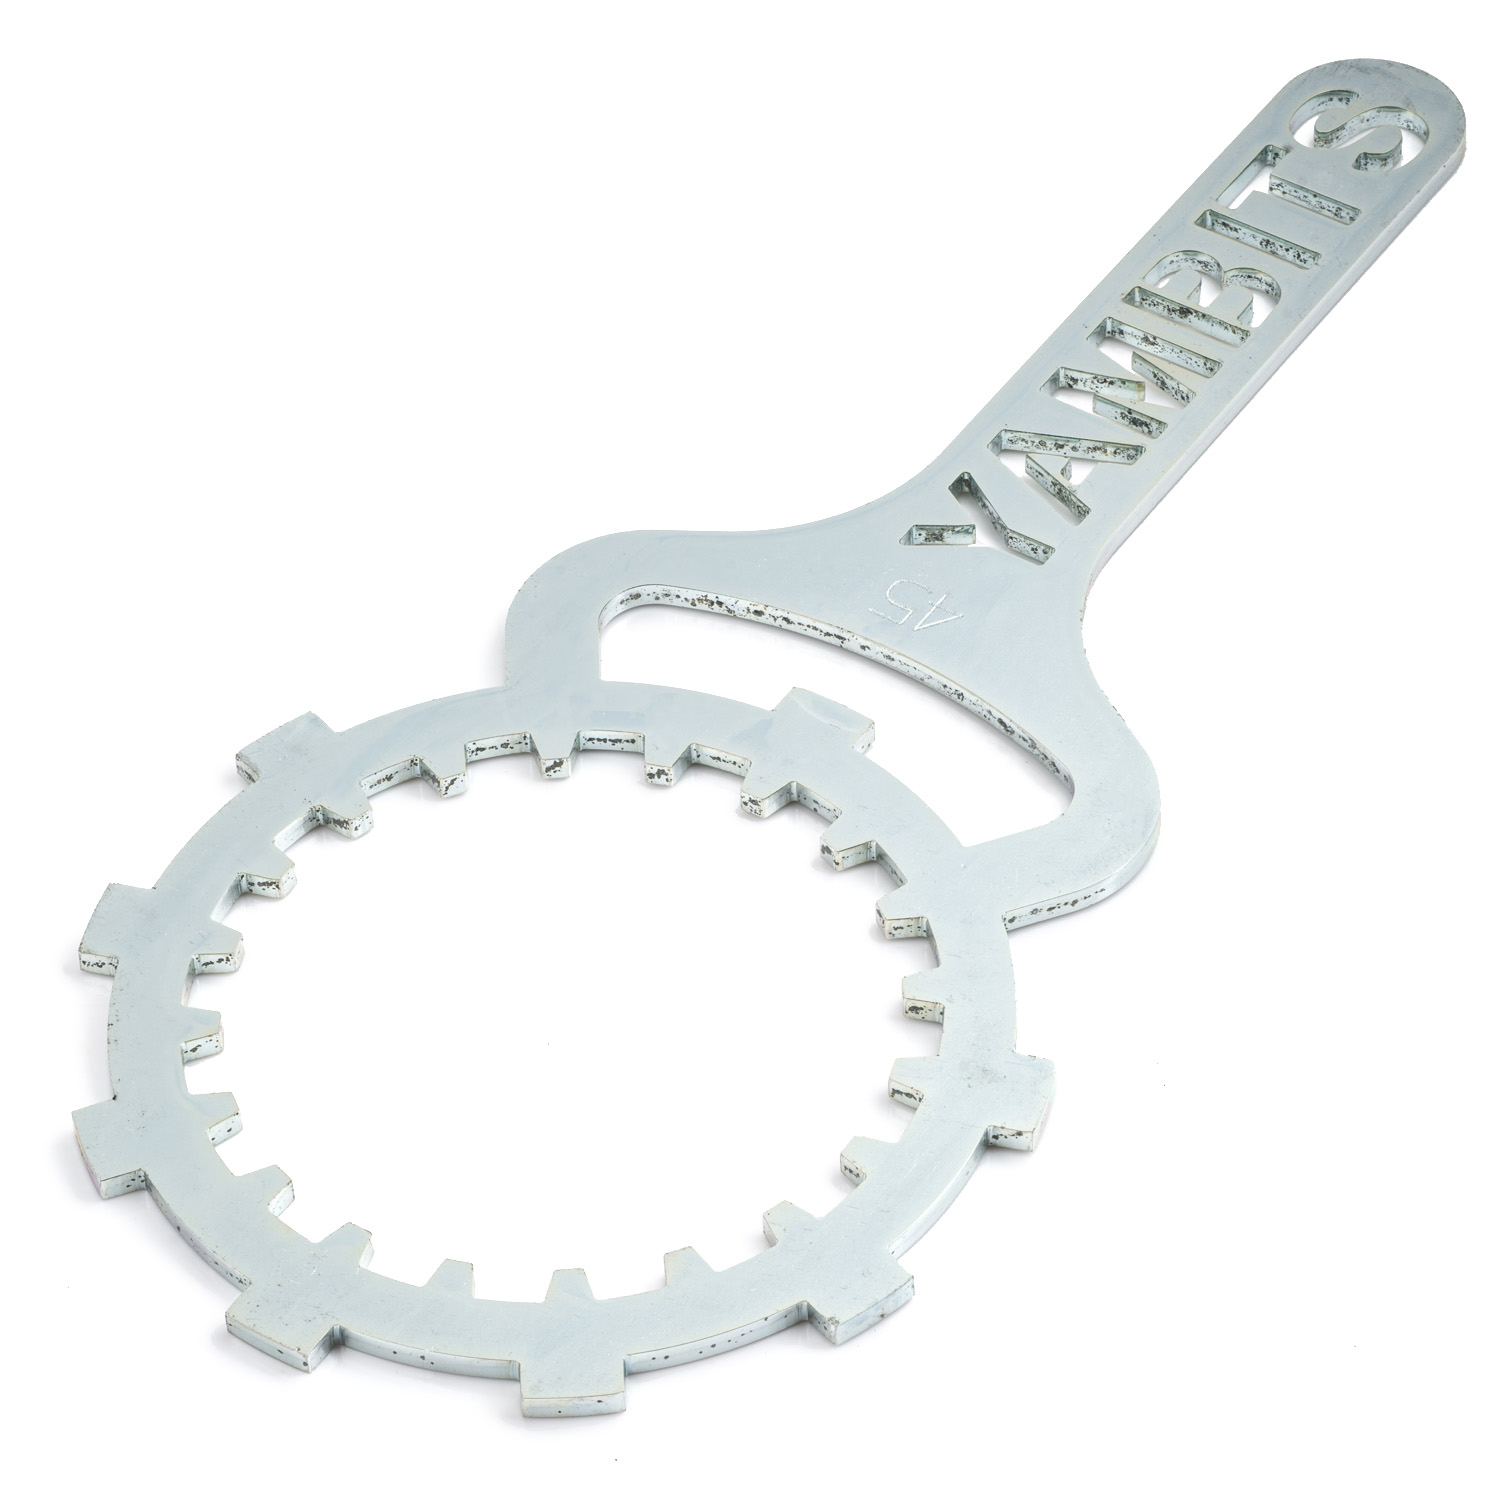 AS1 Clutch Holding Tool